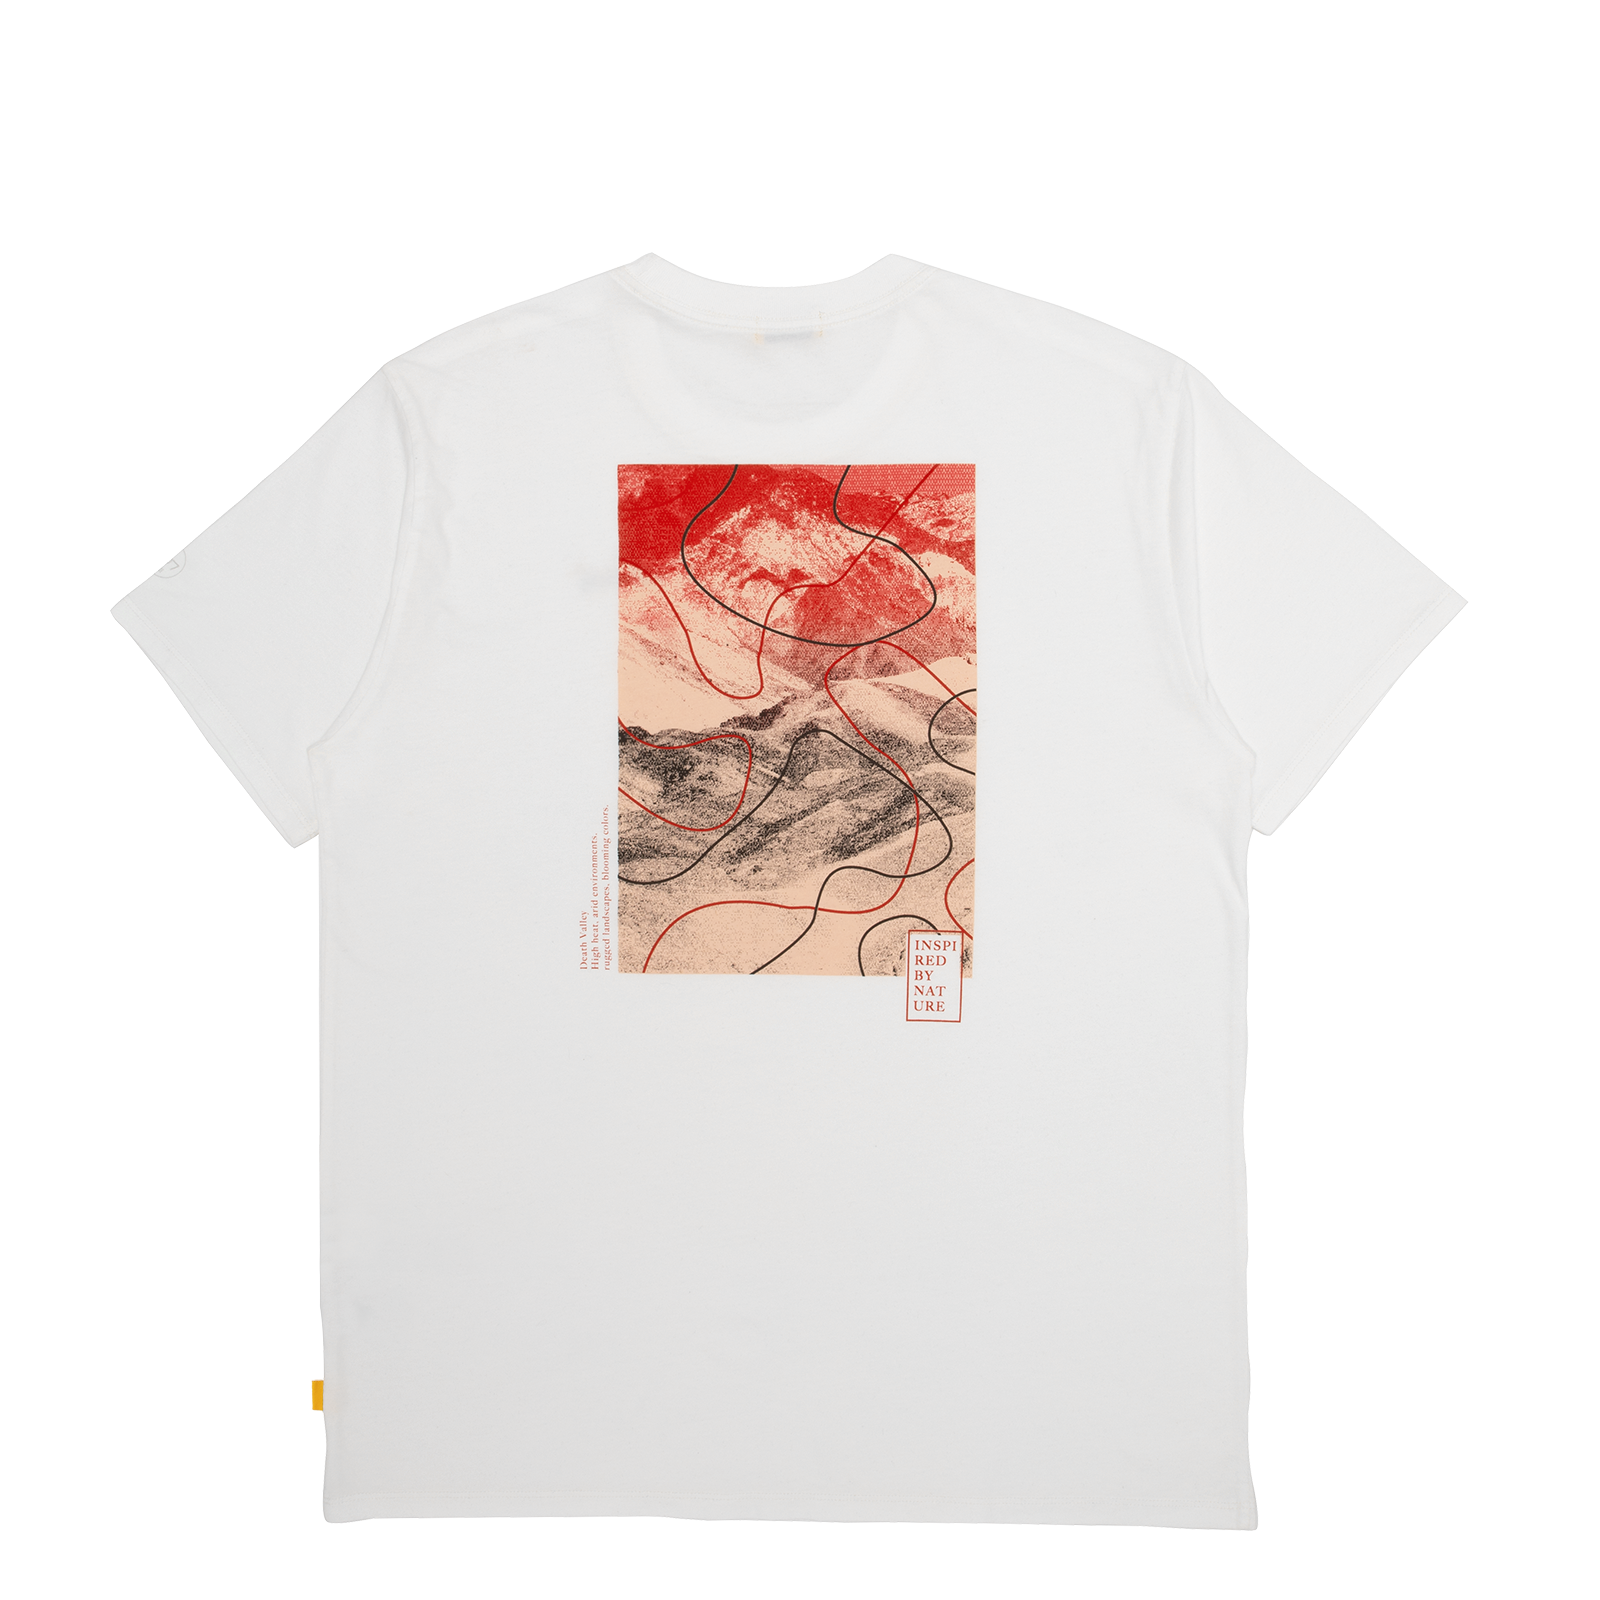 Women's Allgood Graphic Cotton Tee (DV) - Blizzard (Bloom Red/Bloom Coral)